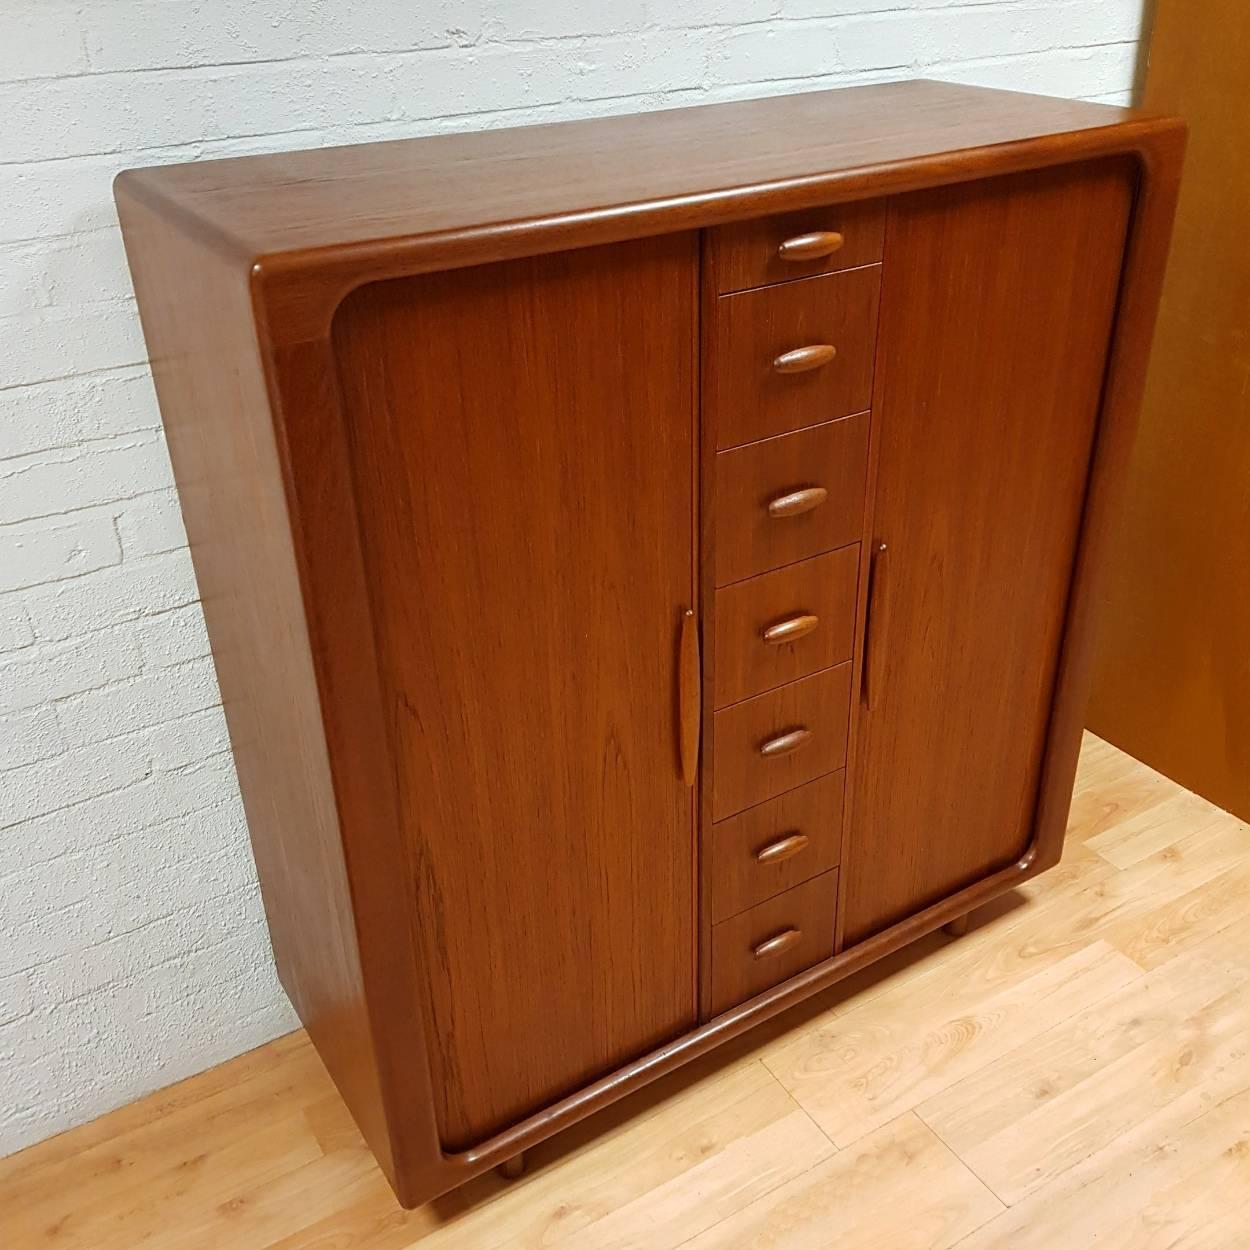 Beautiful Mid-Century Modern teak gentlemen’s chest / dresser by Dyrlund of Denmark. Beautifully proportioned and high quality piece of furniture with very stylish lines, whilst having a small footprint. The cabinet consists of two tambour cupboard